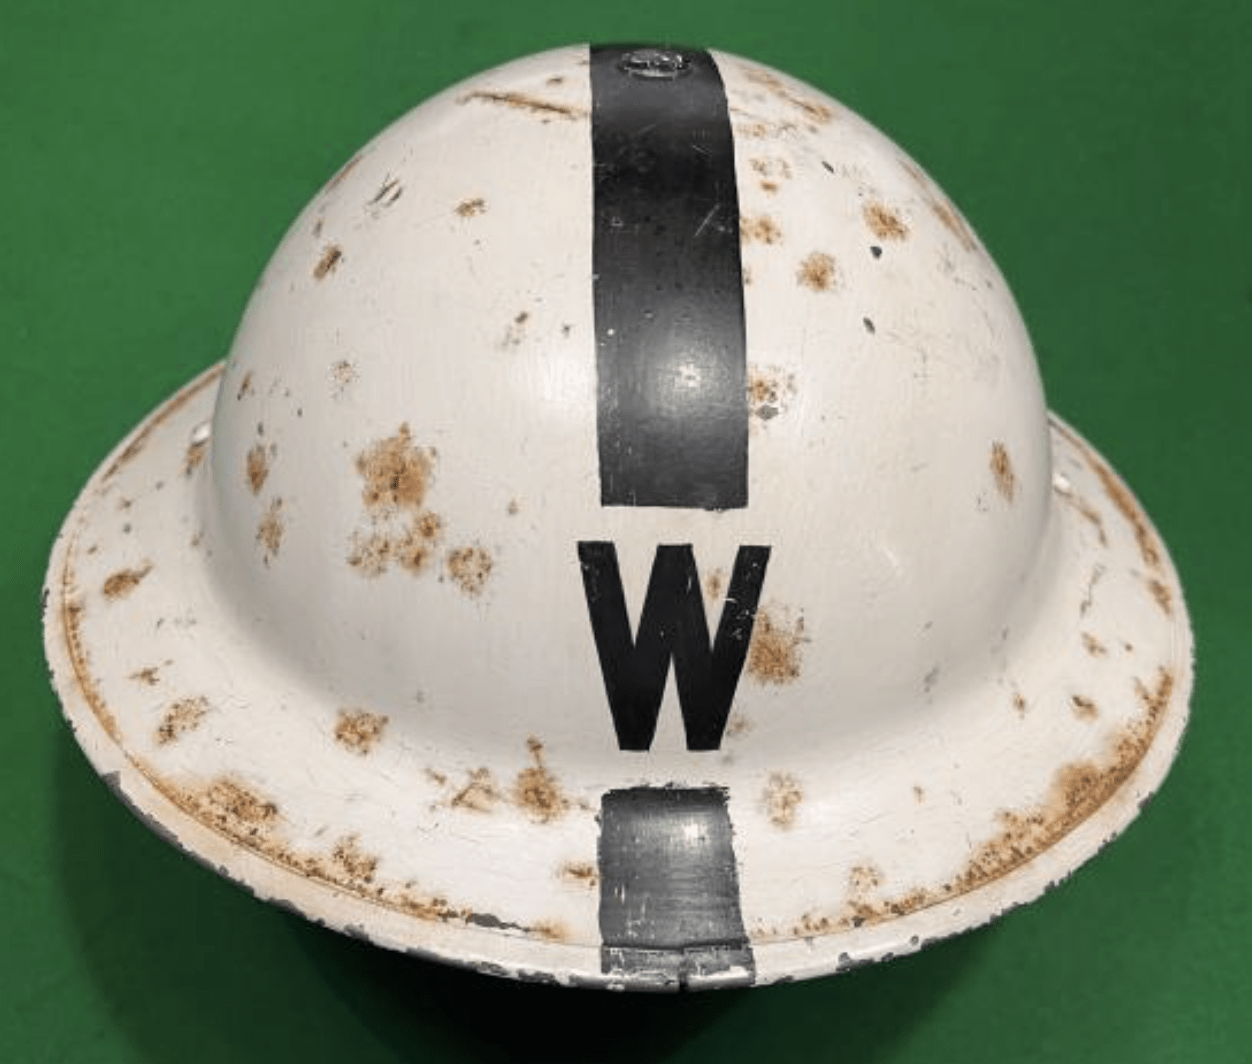 WW2 Home Front Wardens helmet for Sale